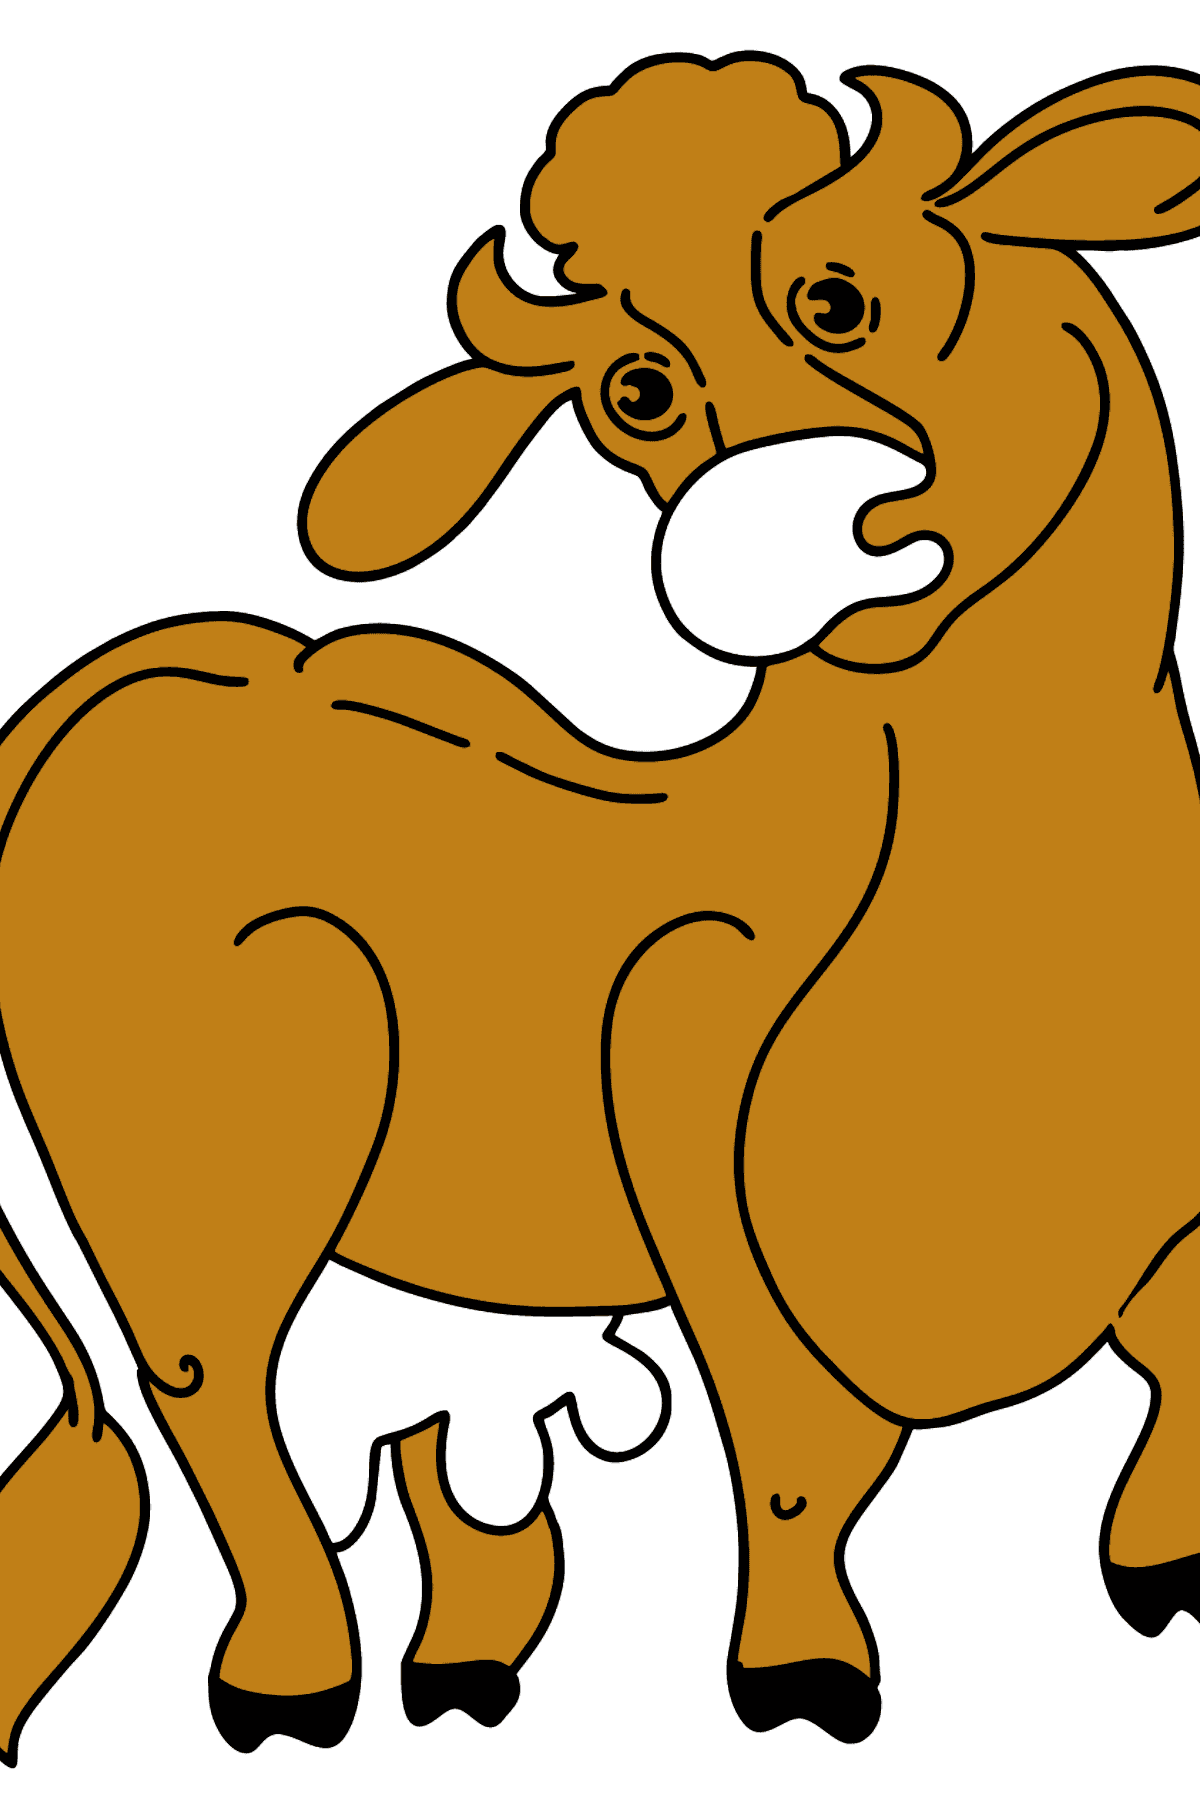 Cow coloring page - Coloring Pages for Kids